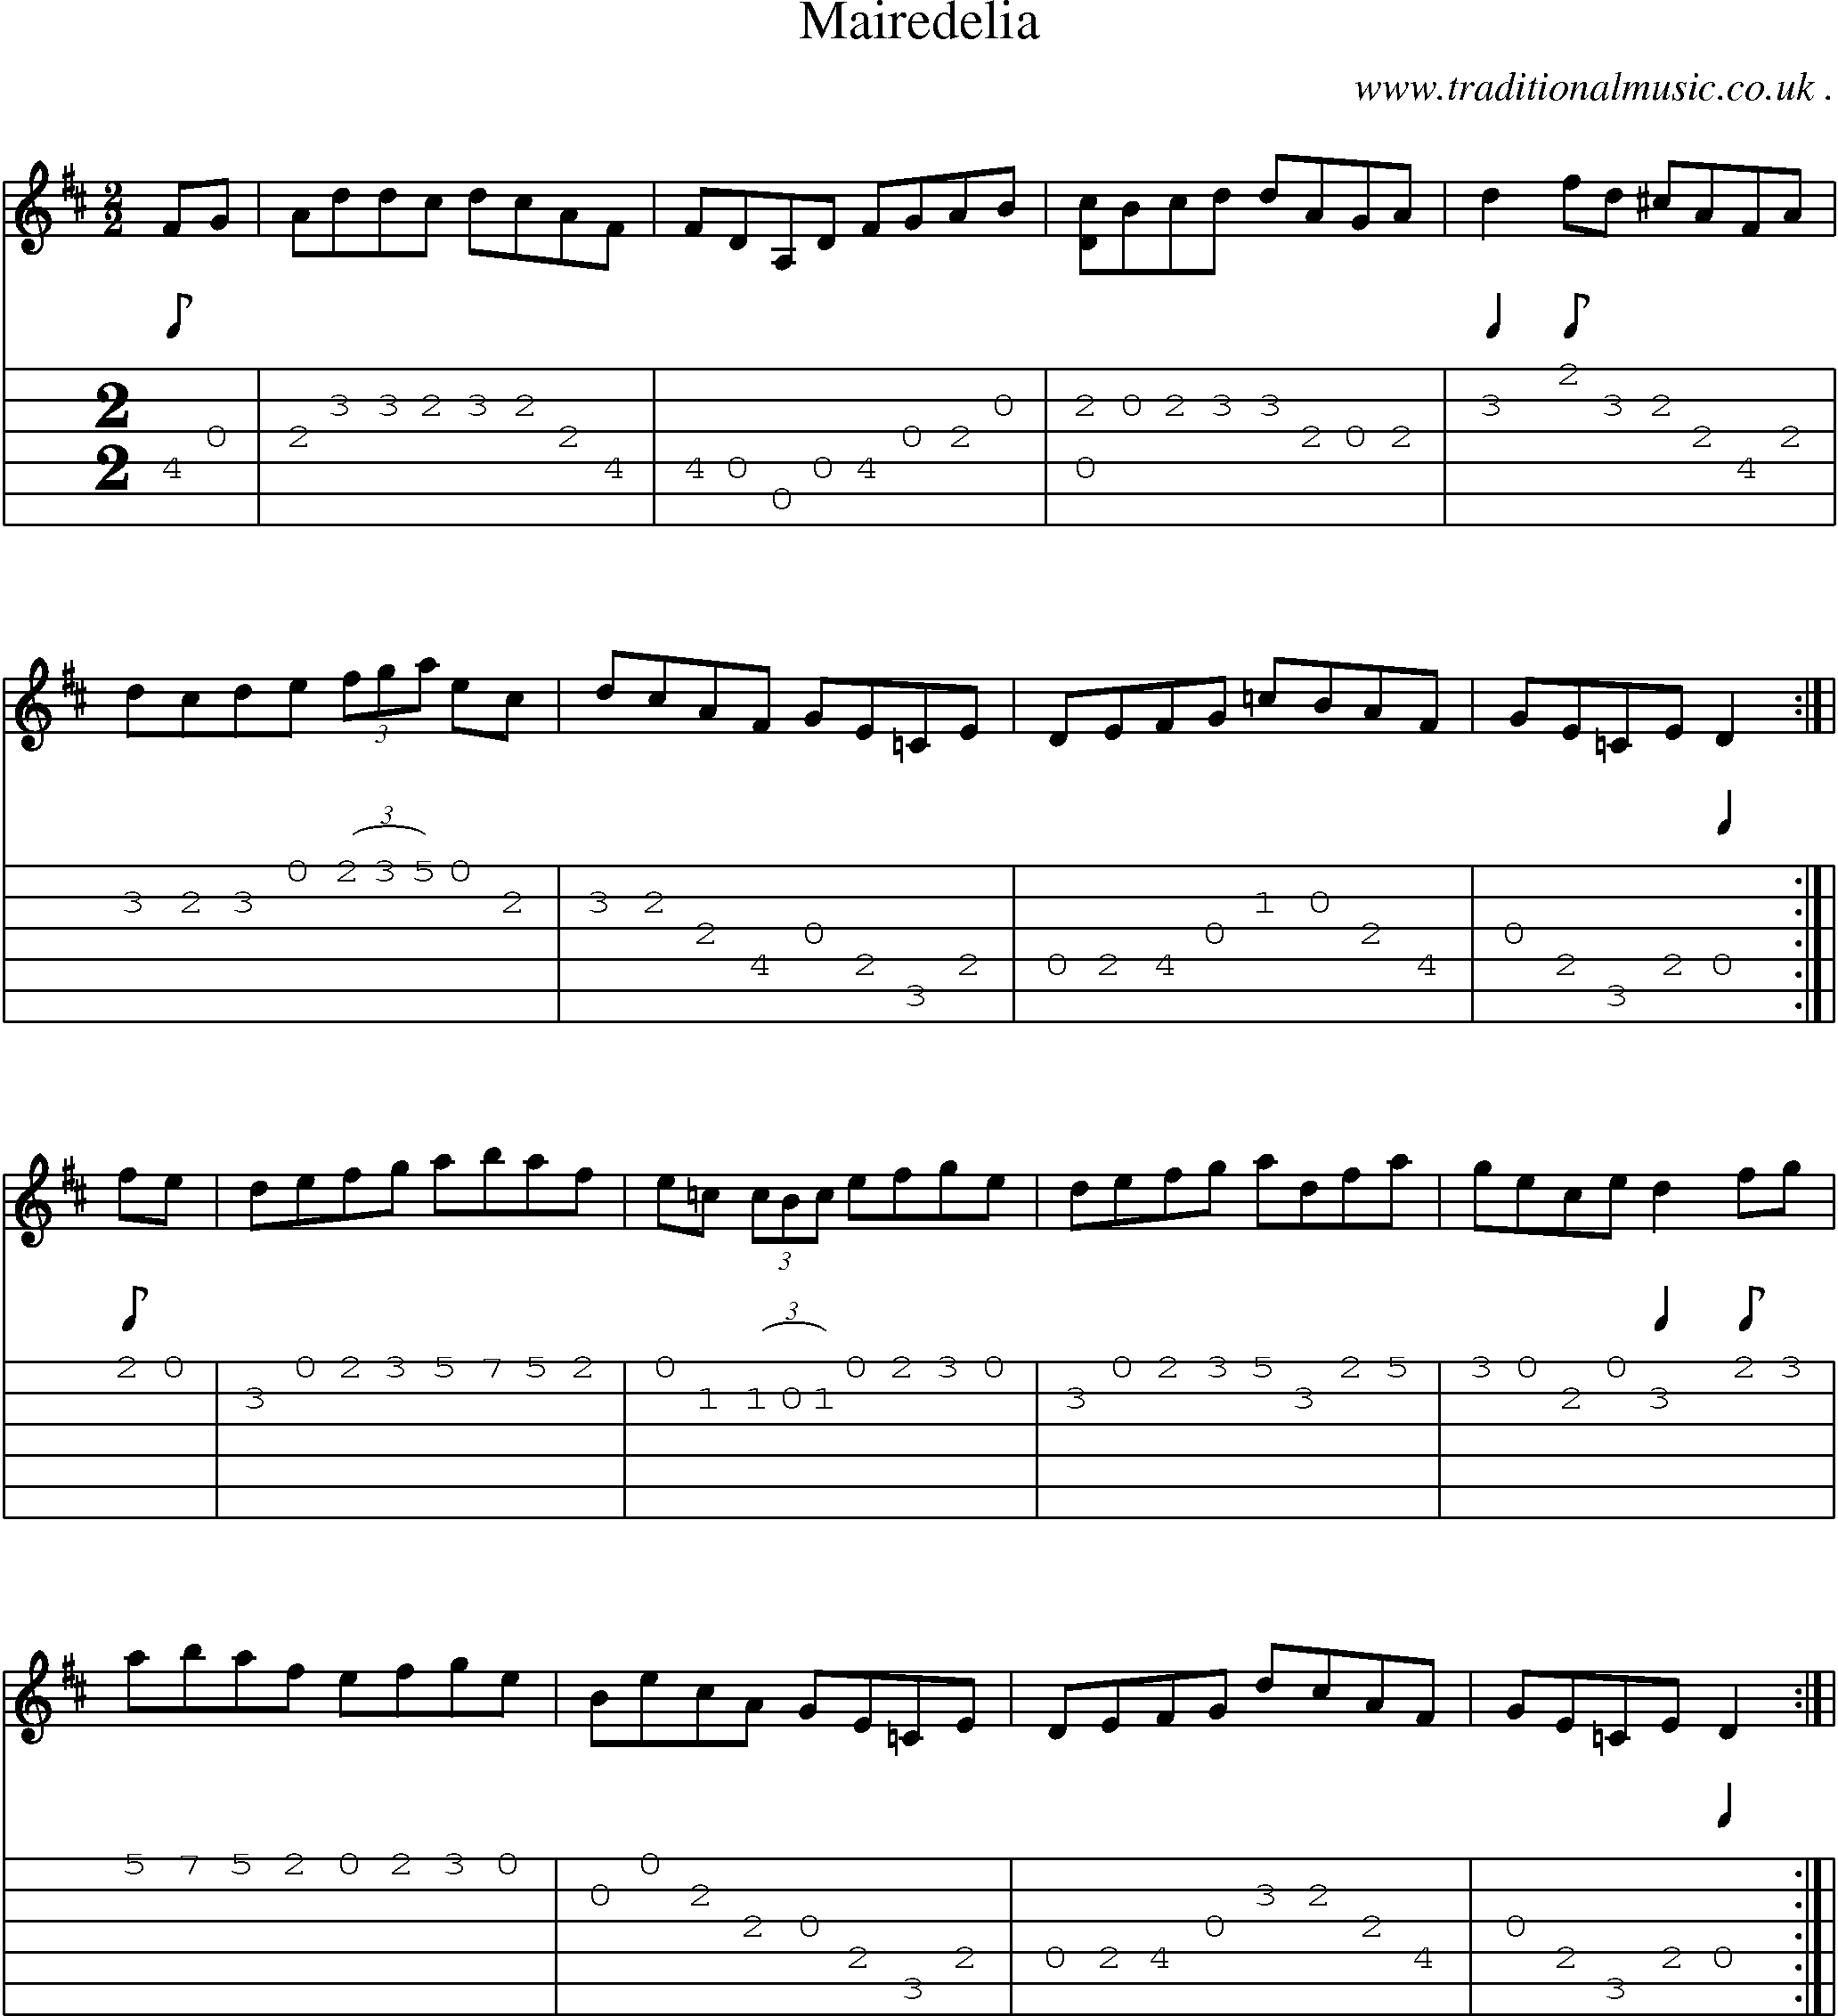 Sheet-Music and Guitar Tabs for Mairedelia